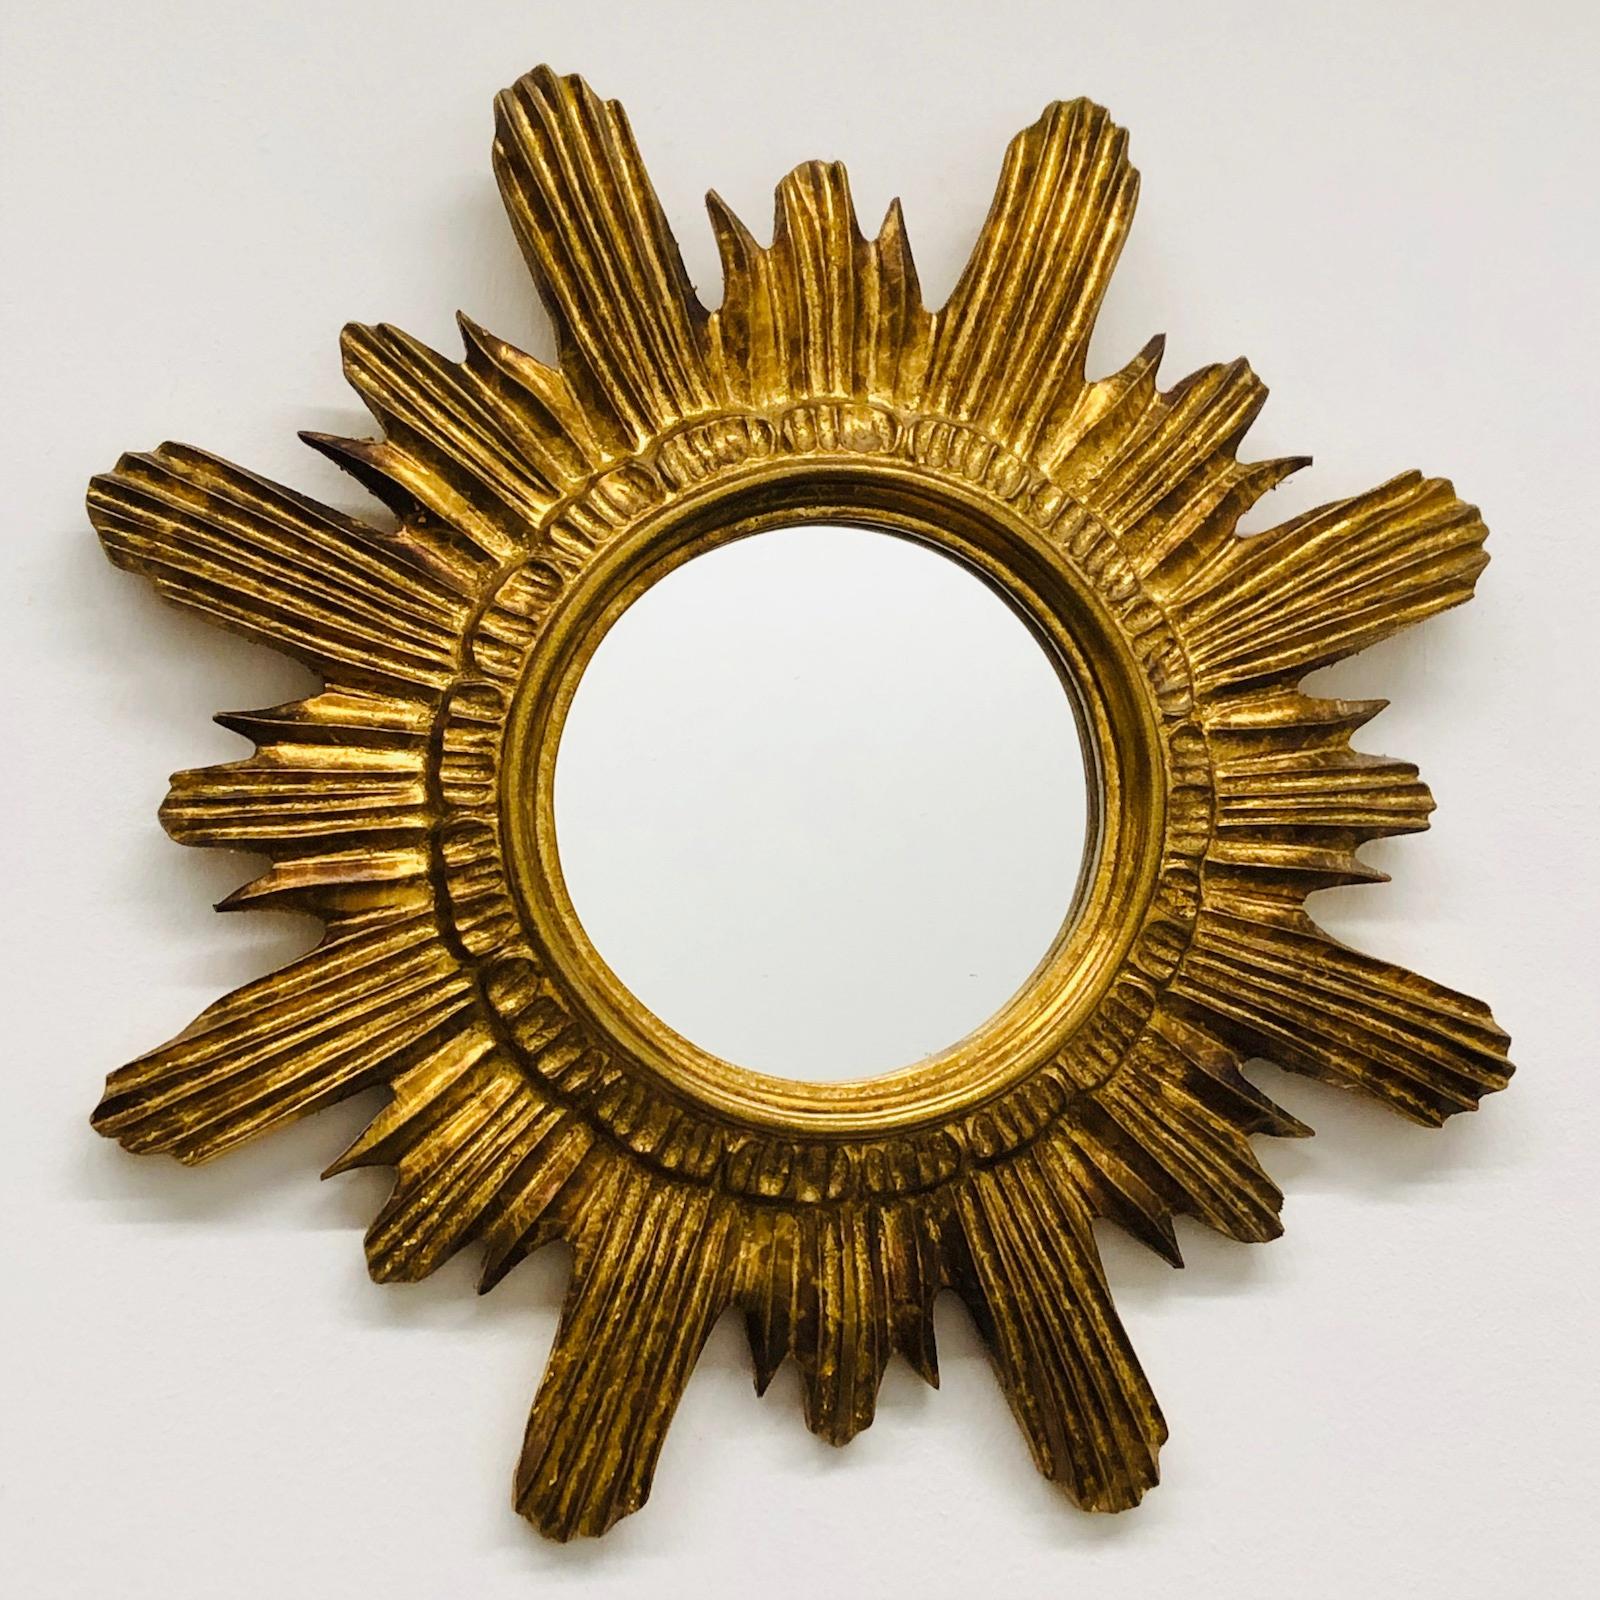 A gorgeous starburst mirror. Made of gilded wood and composition. No chips, no cracks, no repairs. It measures approximate 16 1/2